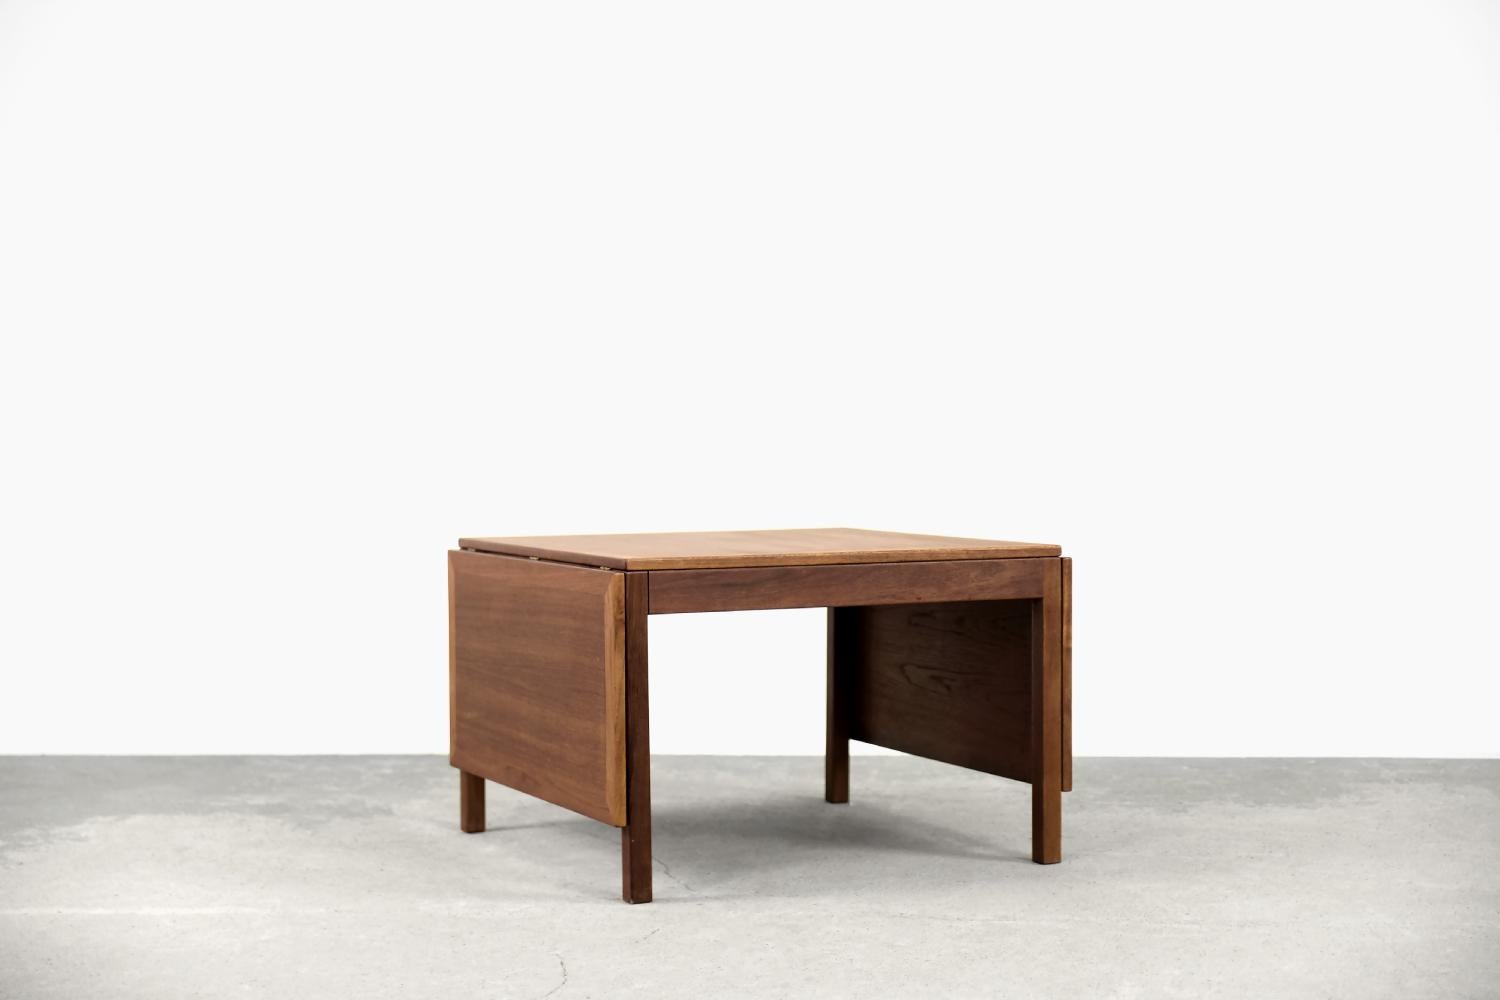 Vintage Modern Danish Teak Wood Coffee Table by Børge Mogensen for Fredericia In Good Condition For Sale In Warszawa, Mazowieckie